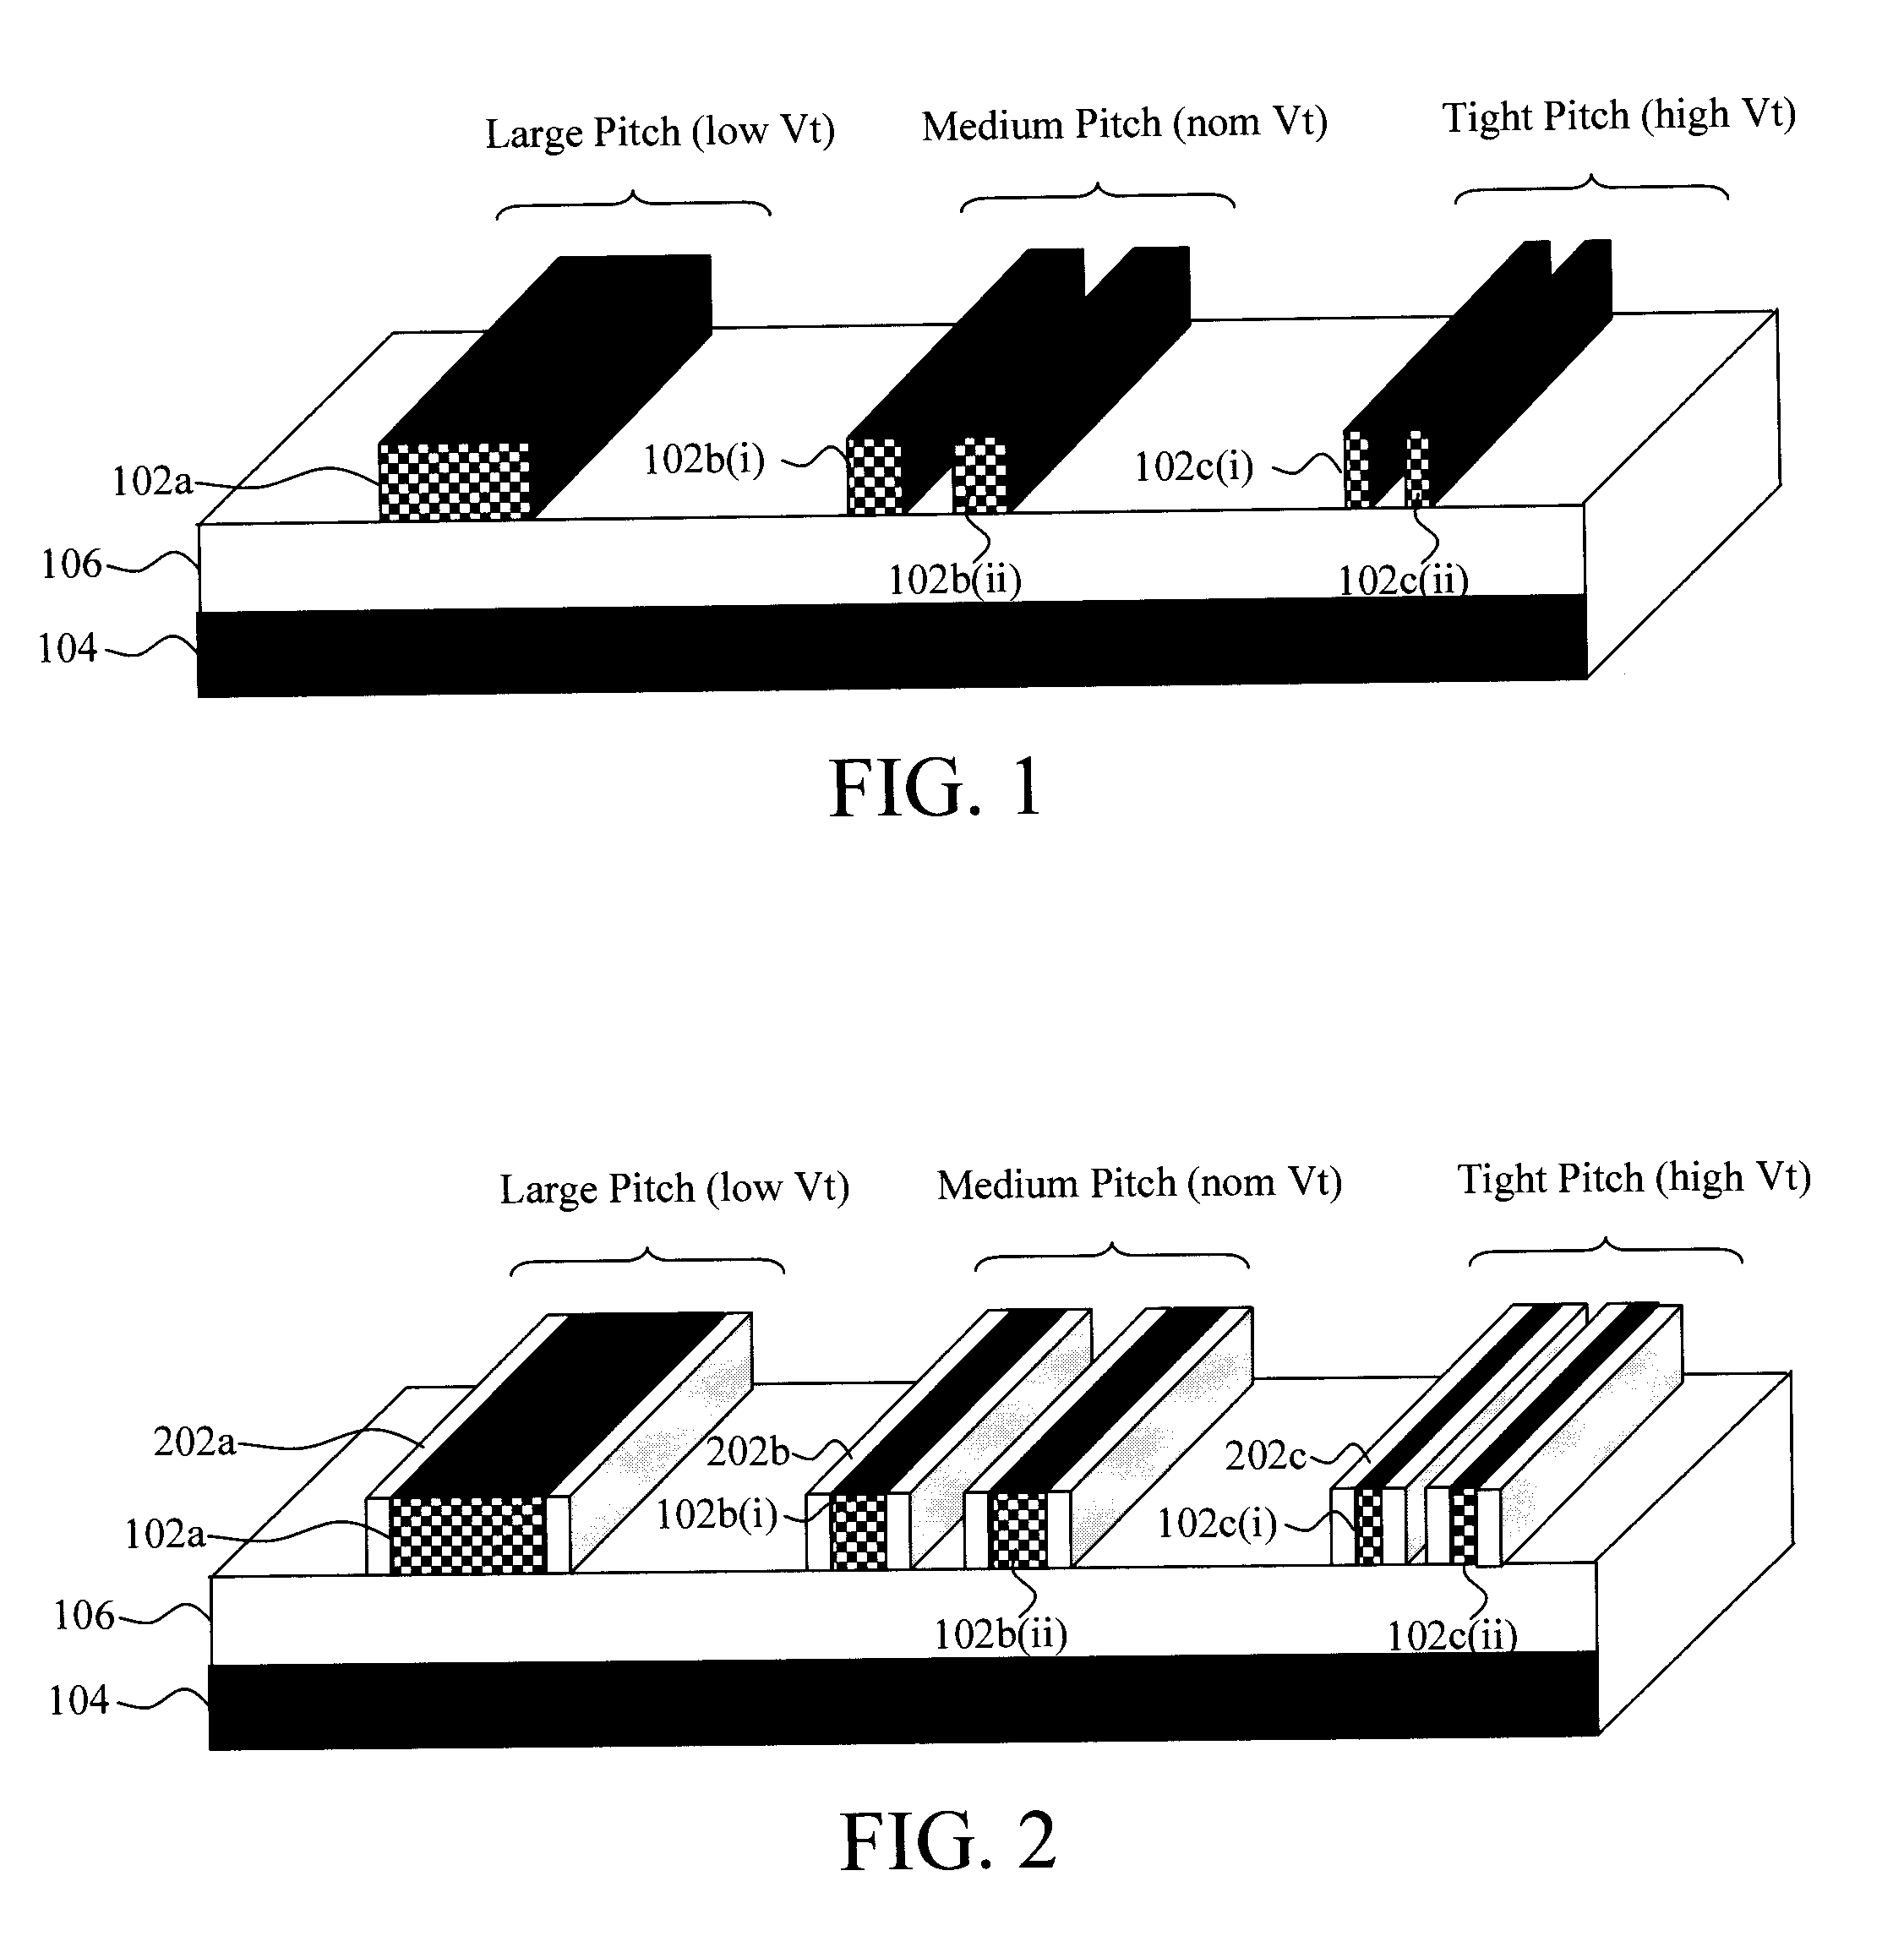 Techniques for metal gate workfunction engineering to enable multiple threshold voltage finfet devices